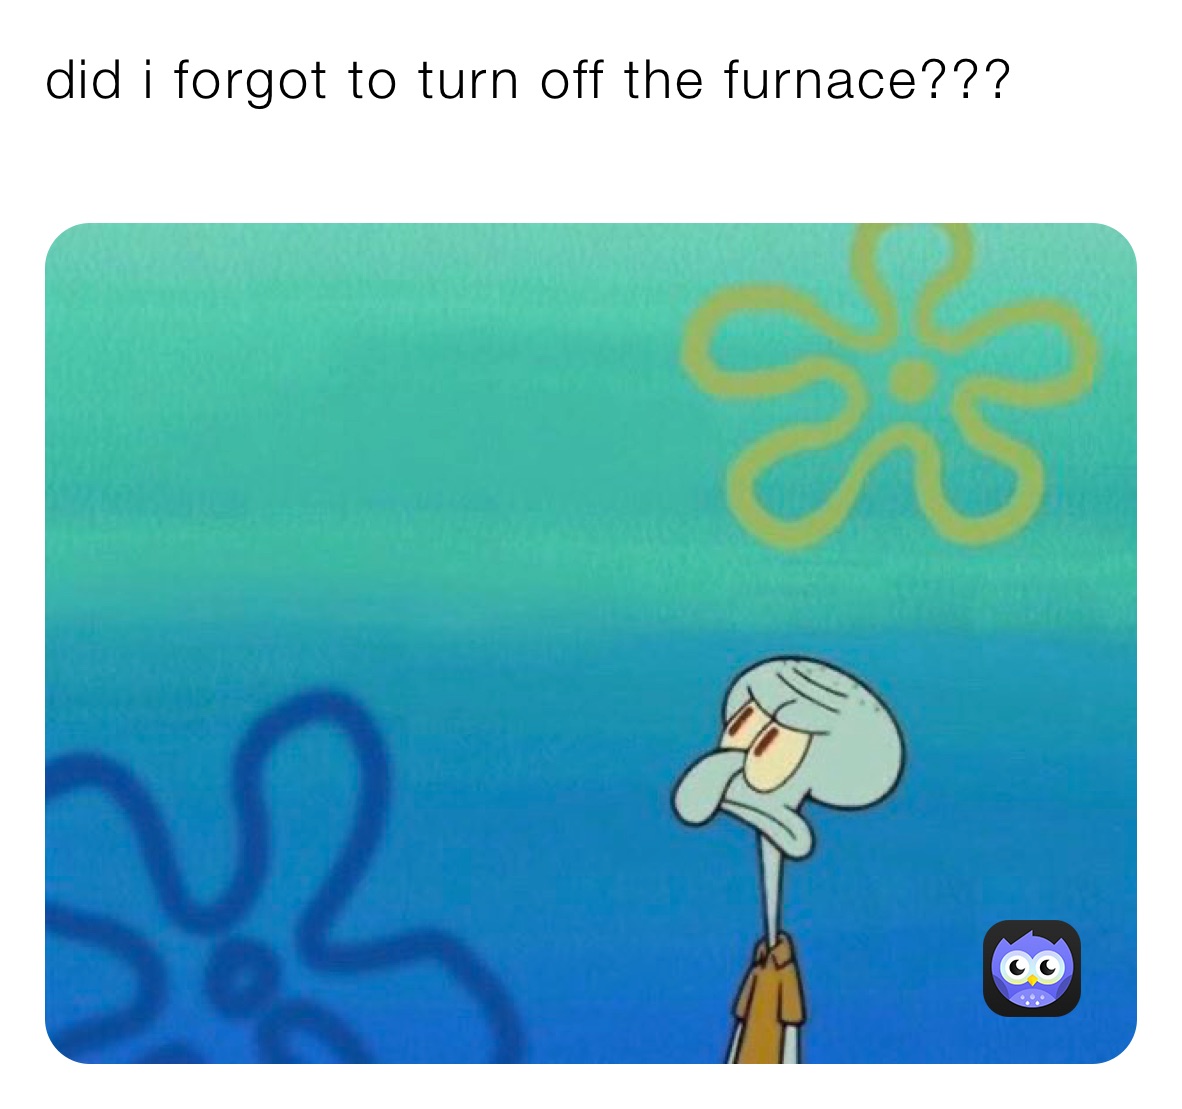 did i forgot to turn off the furnace???
